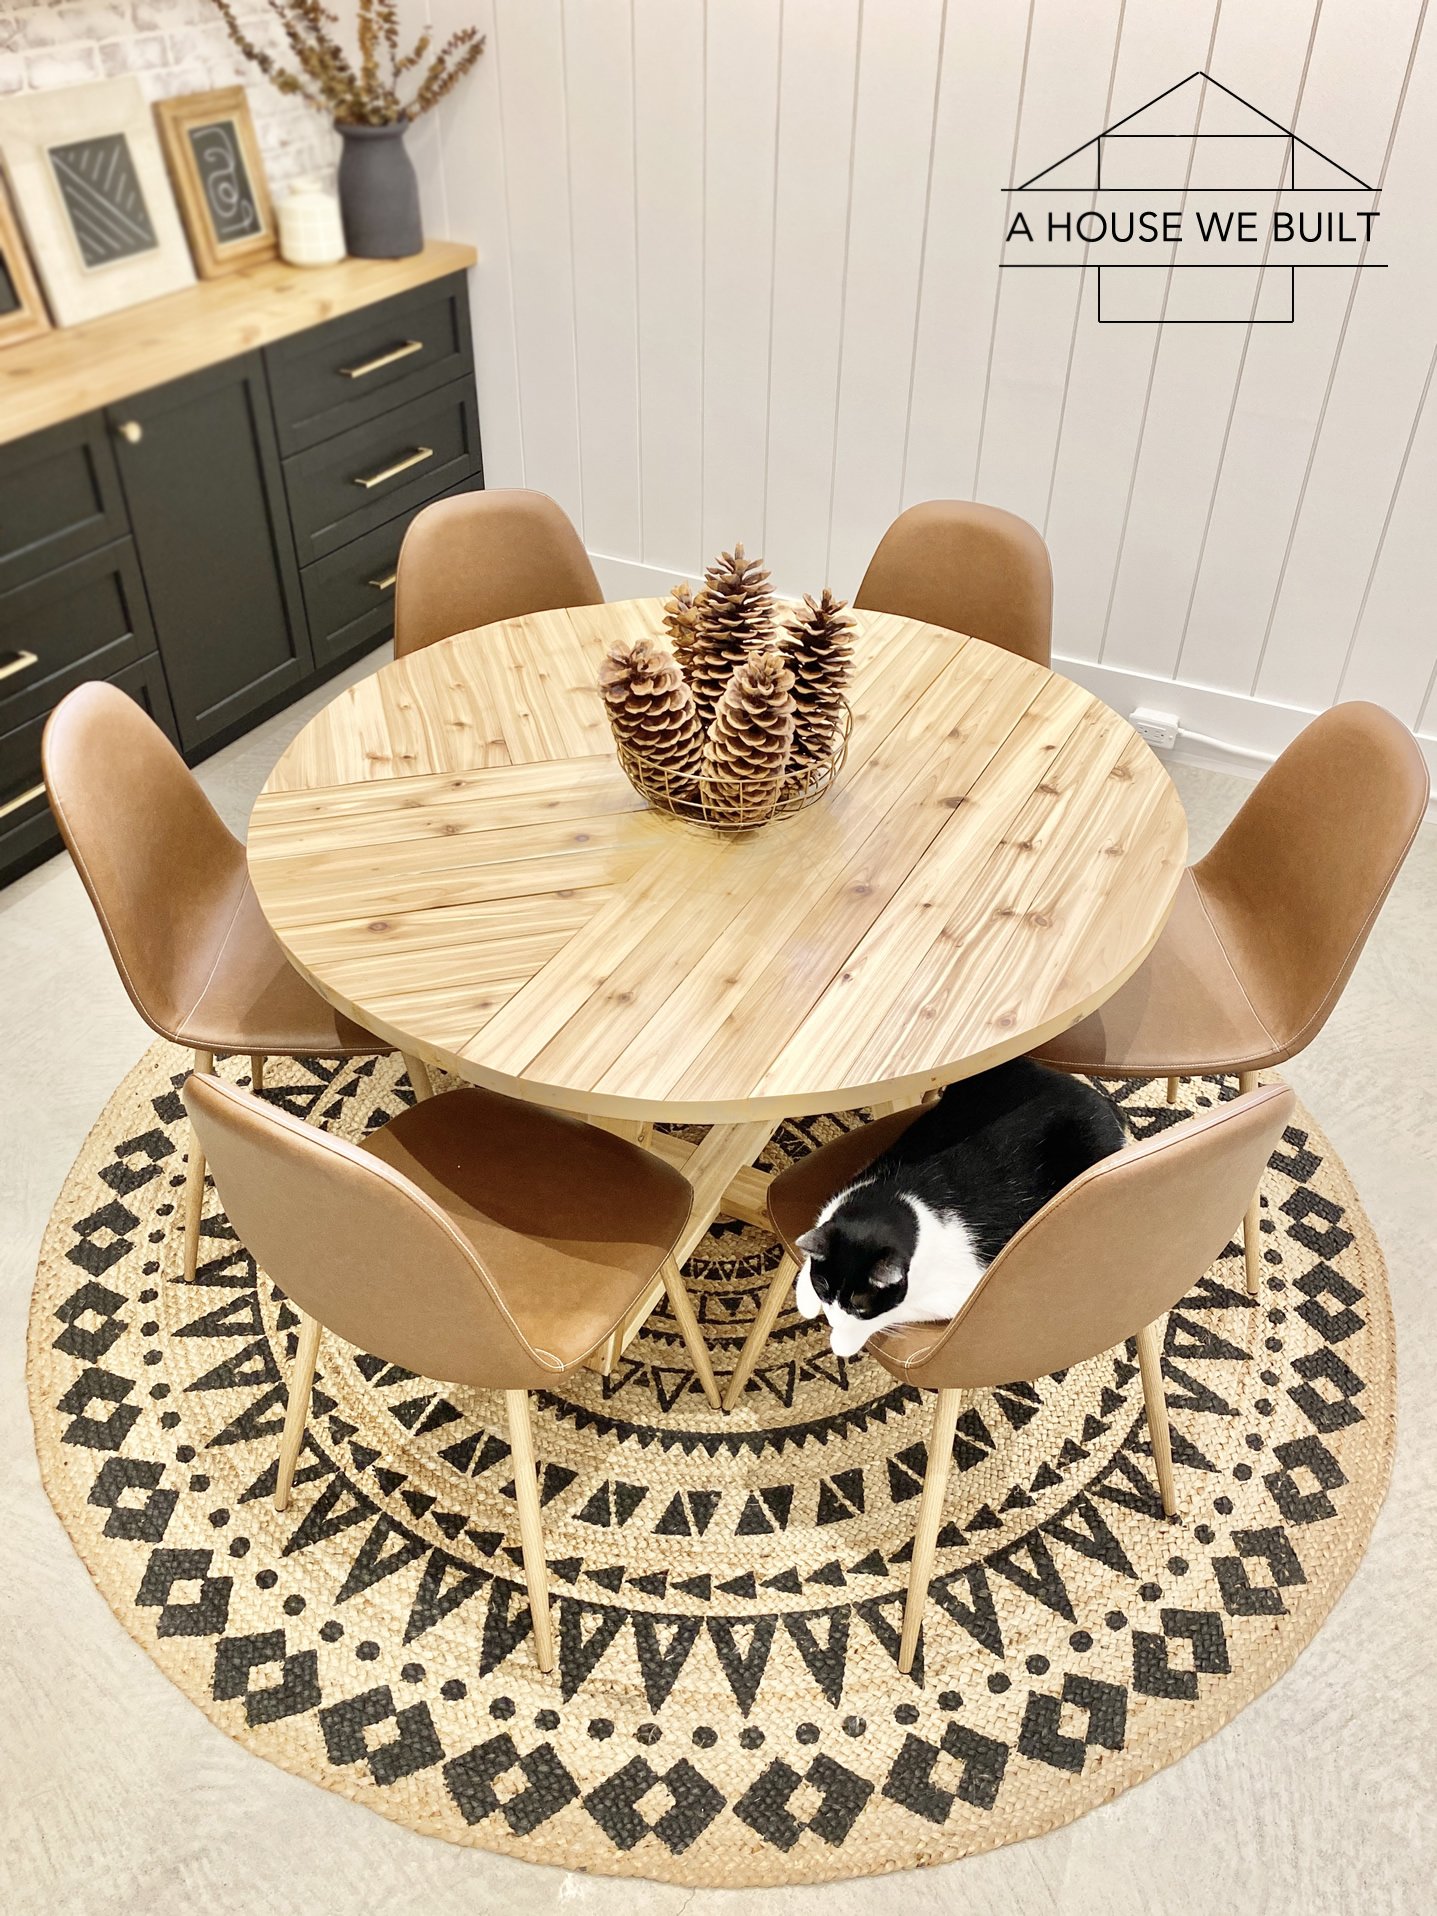 How To Build A Round Table, How To Make A Circular Tabletop